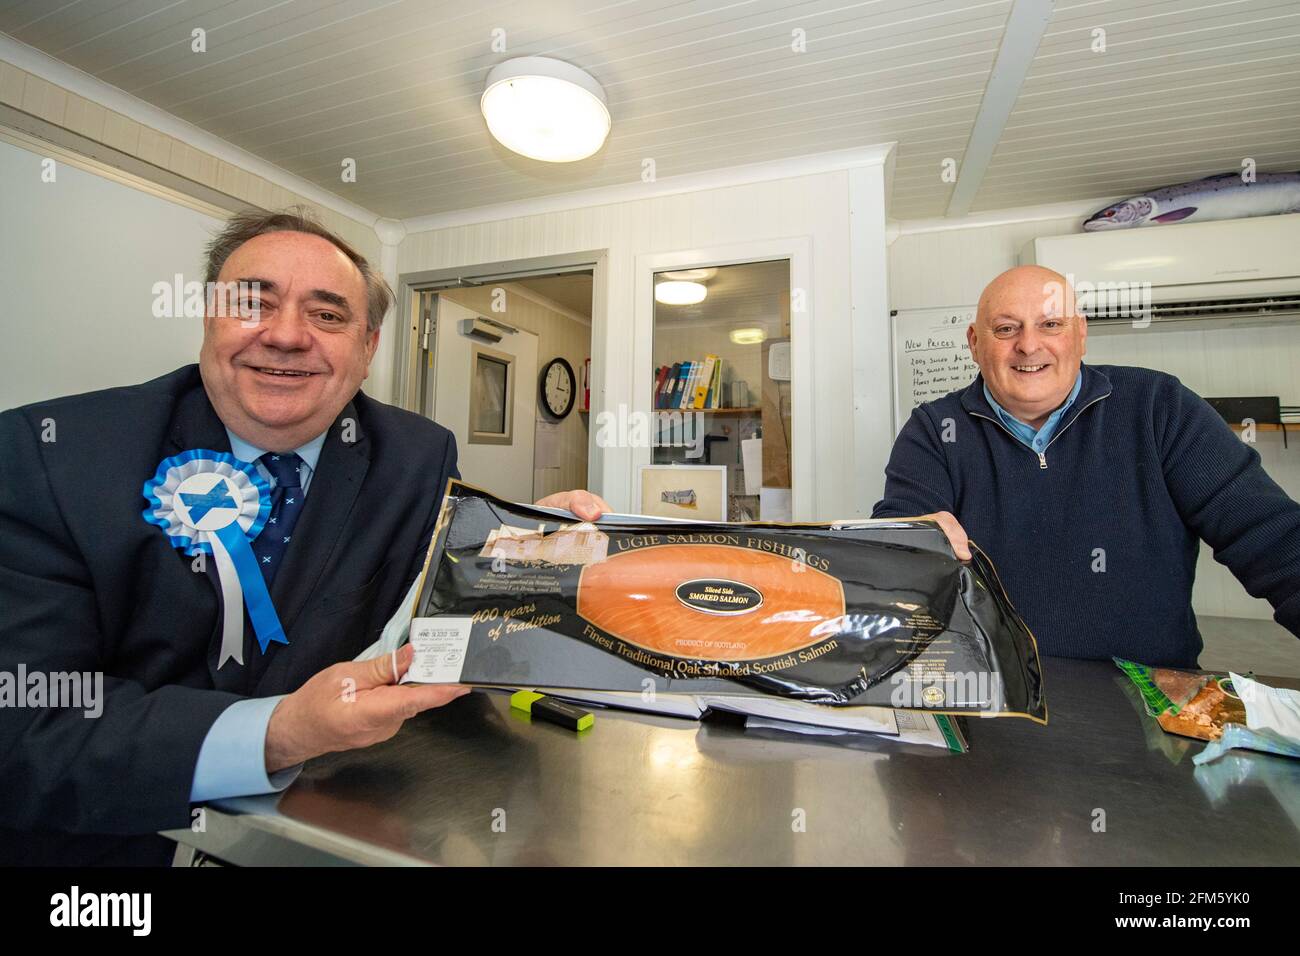 Boddam, Scotland, UK. 6th May, 2021. PICTURED: (left) Alex Salmond, Leader of the Alba Party seen talking with Joseph (right) who owns Peterhead's local business, Ugie Salmon, which is Scotland's Oldest Fish House established in 1585. Joseph is giving Alex a tasting session showing off his fresh and tasty Salmon produce. Pic Credit: Colin Fisher/Alamy Live News Stock Photo